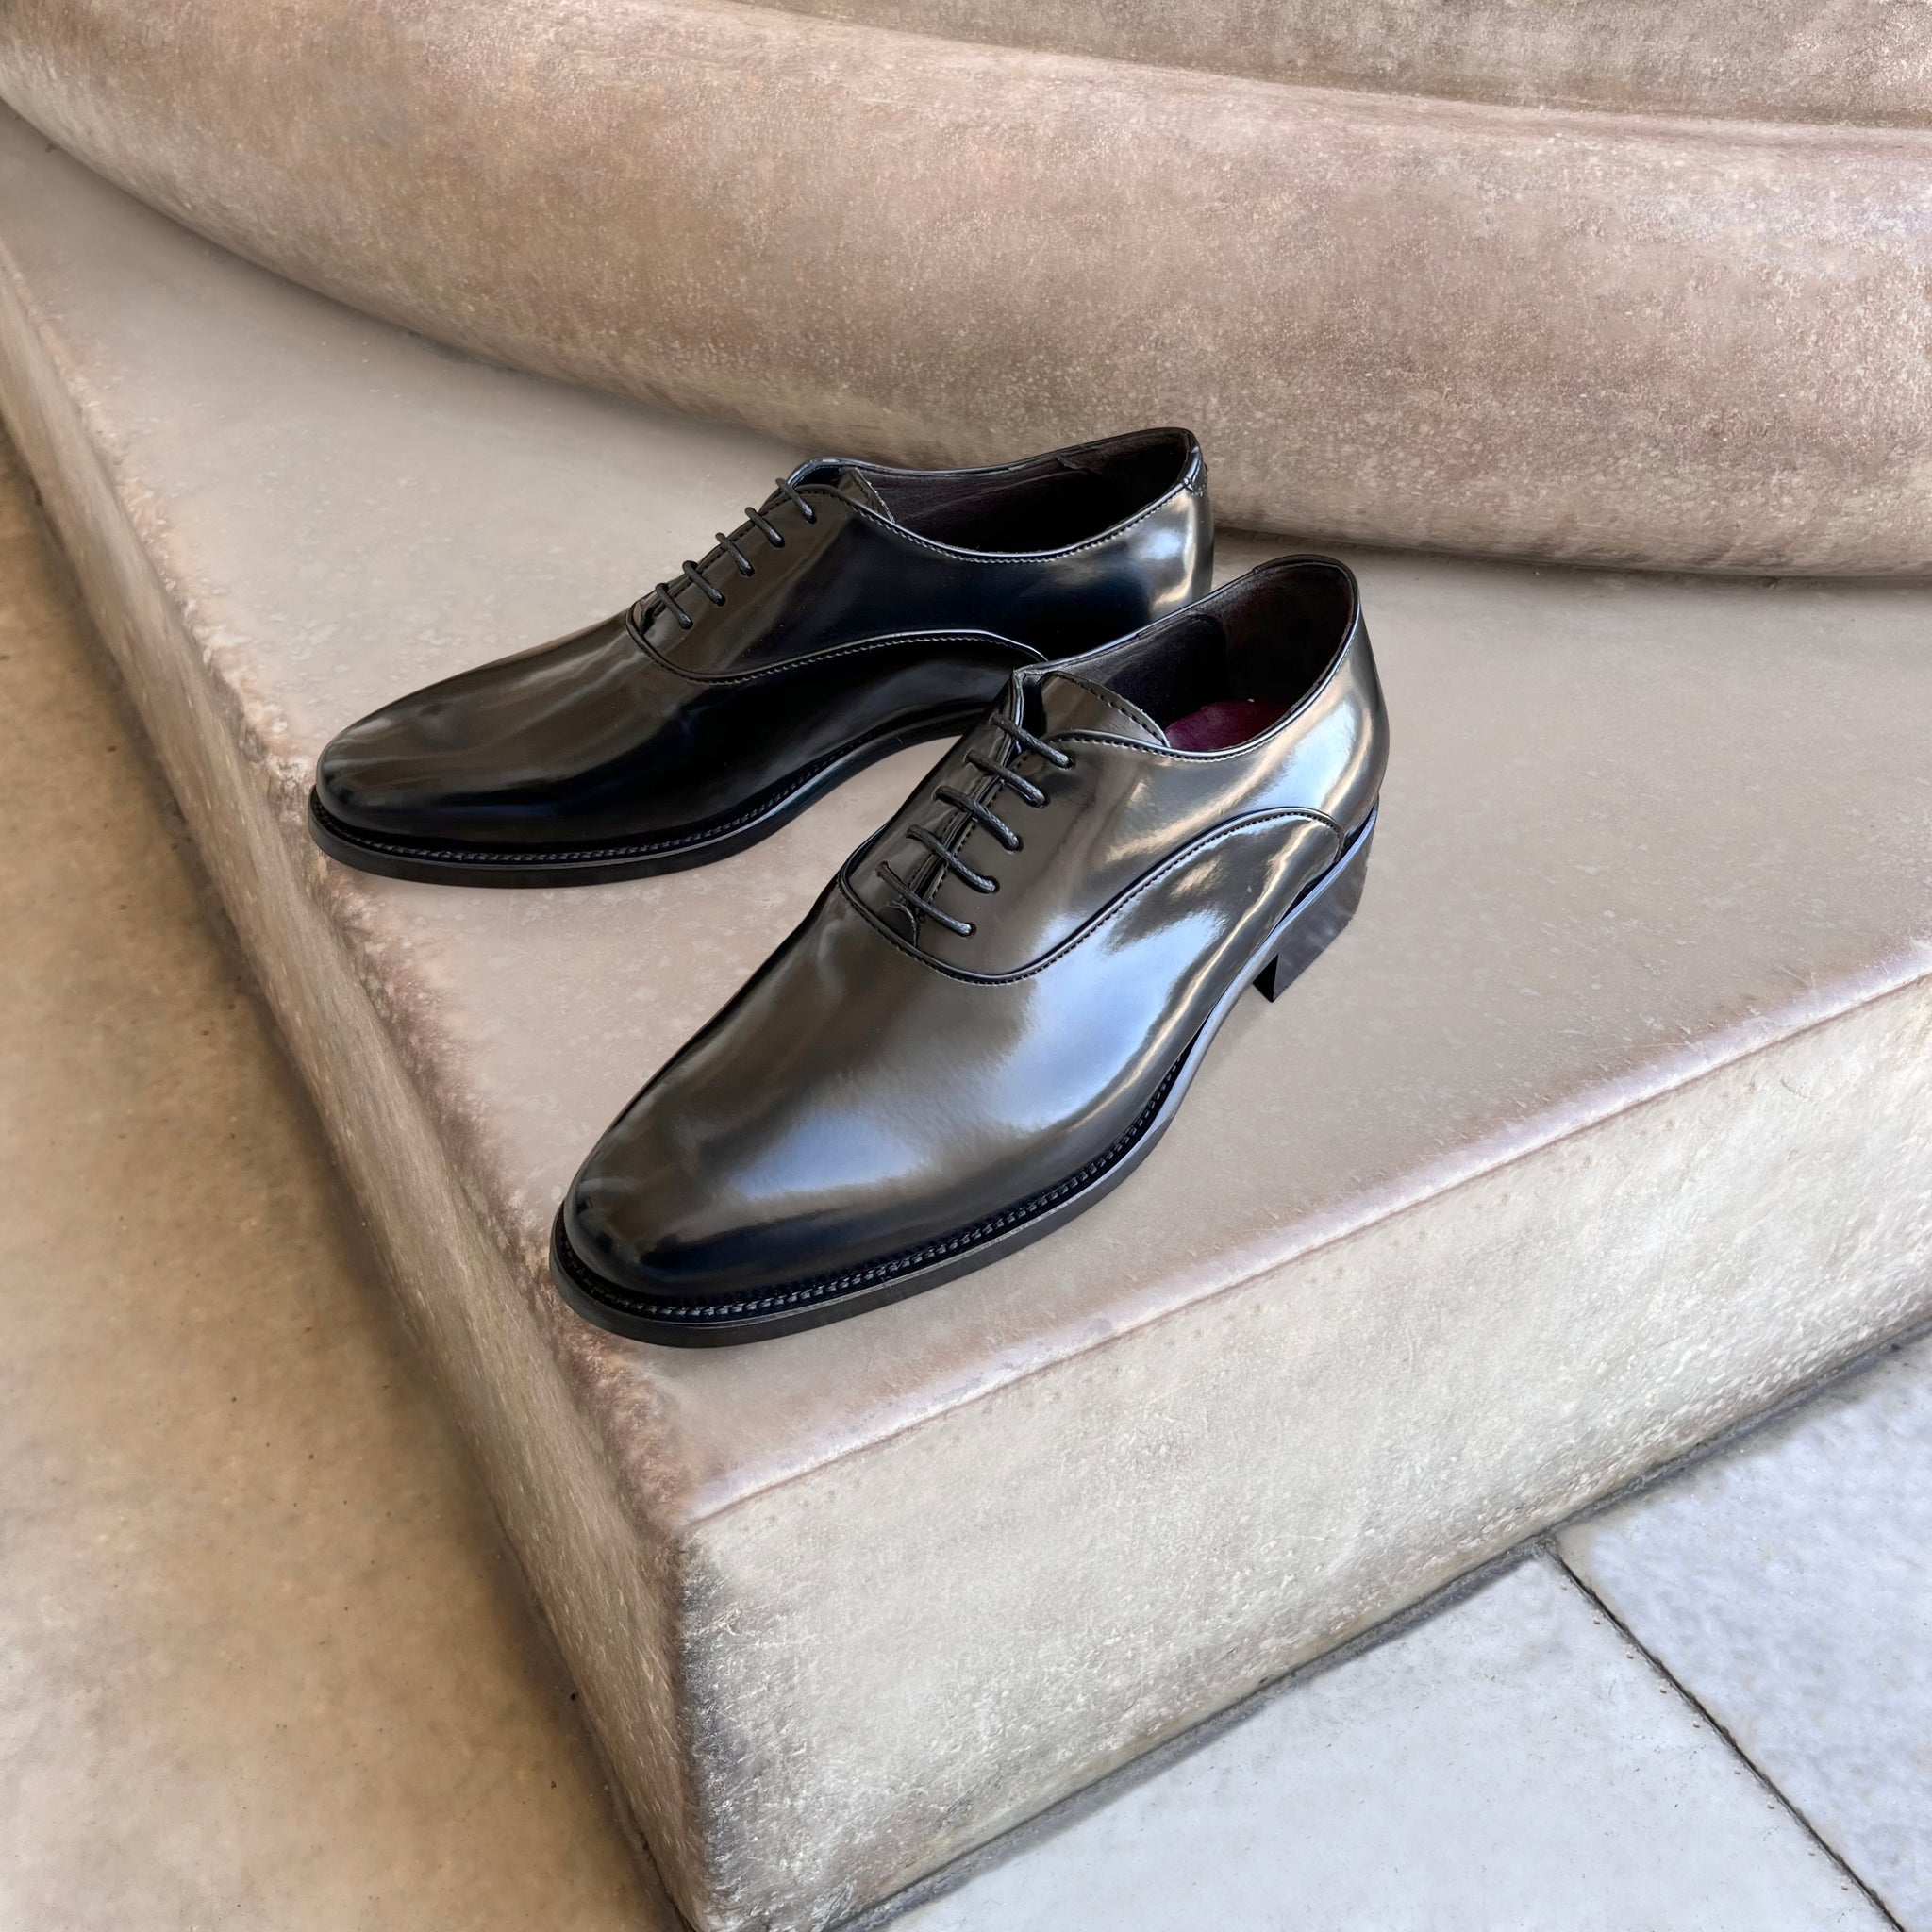 Black polished leather Oxford shoes